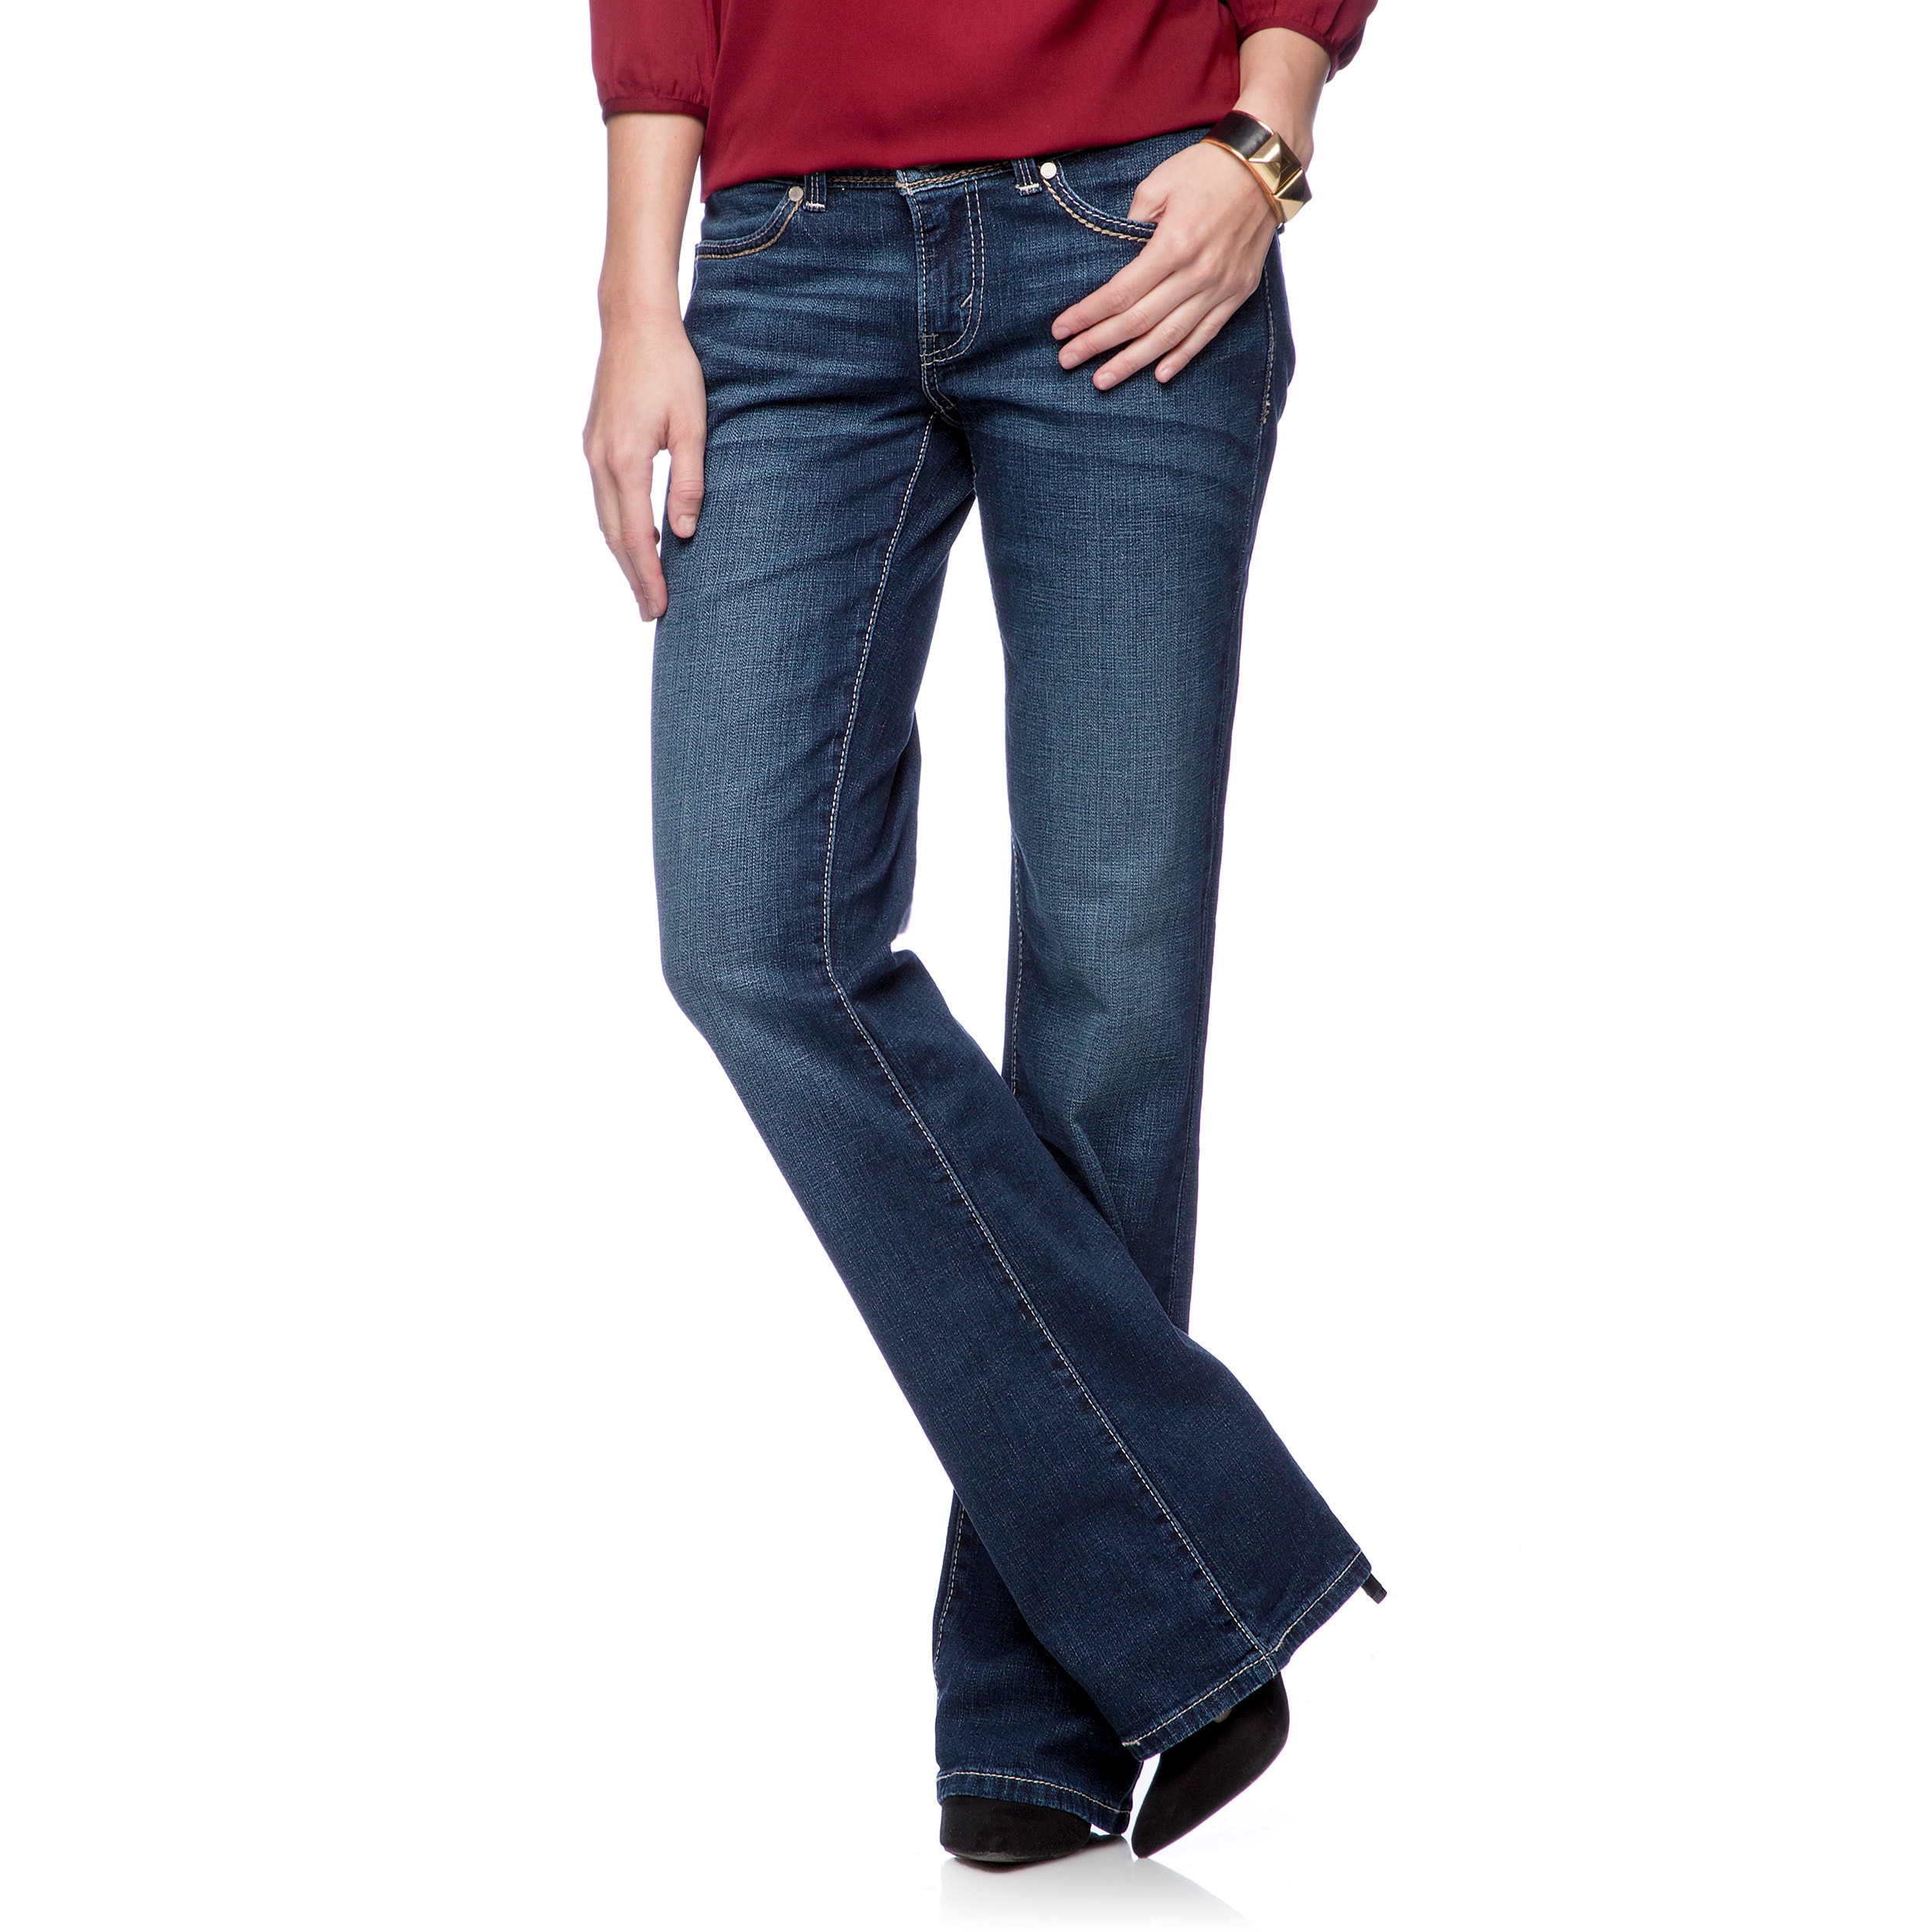 levi's 529 curvy style bootcut jeans